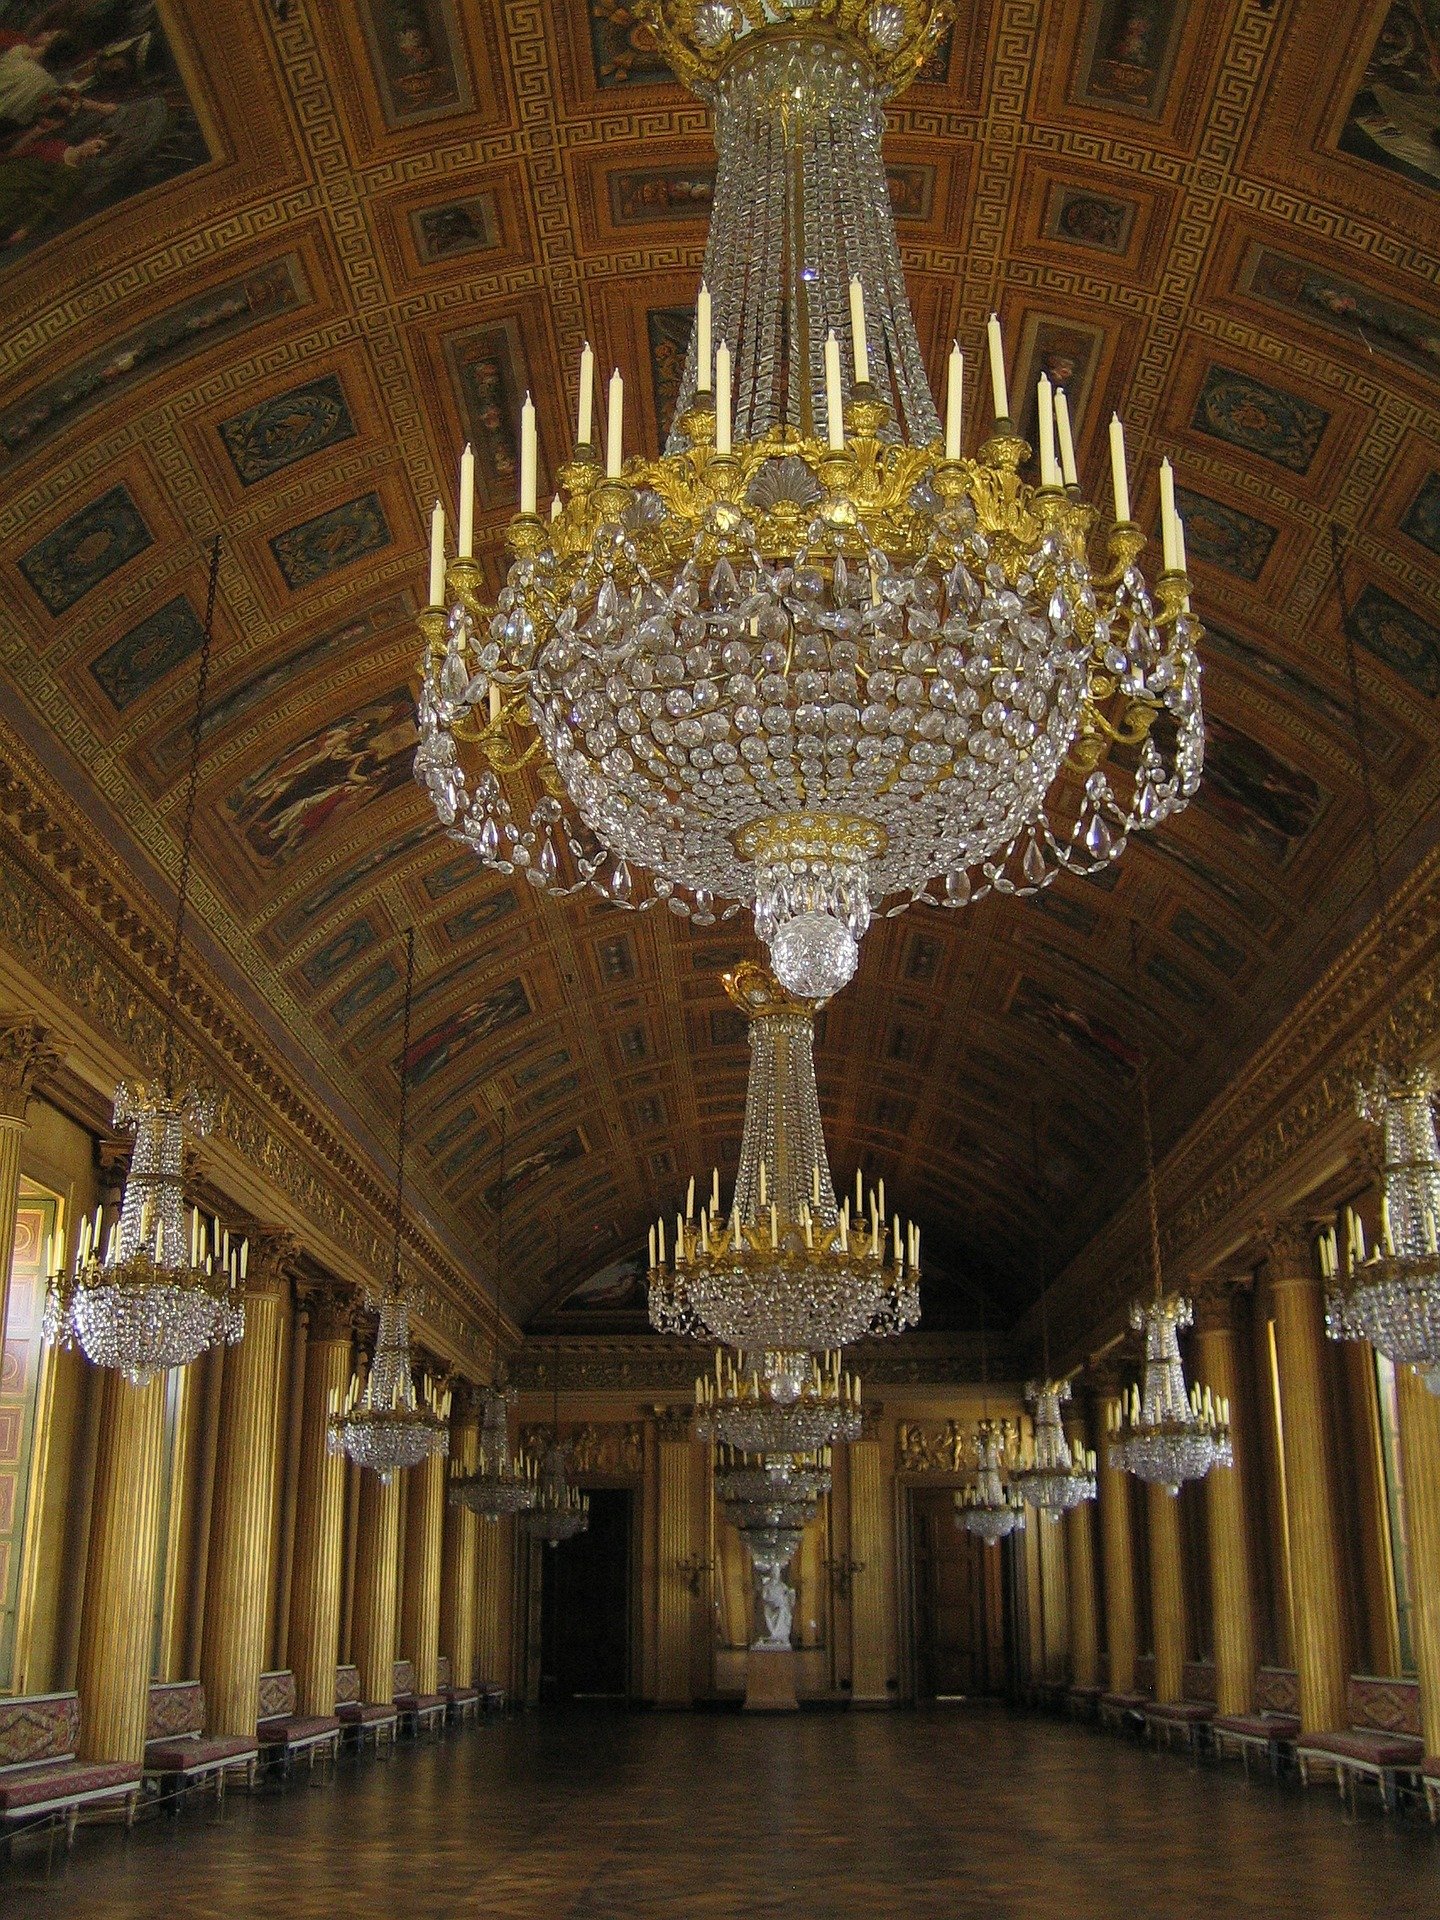 The ceiling was adorned with beautiful sparkling chandeliers. | Photo: Pixabay